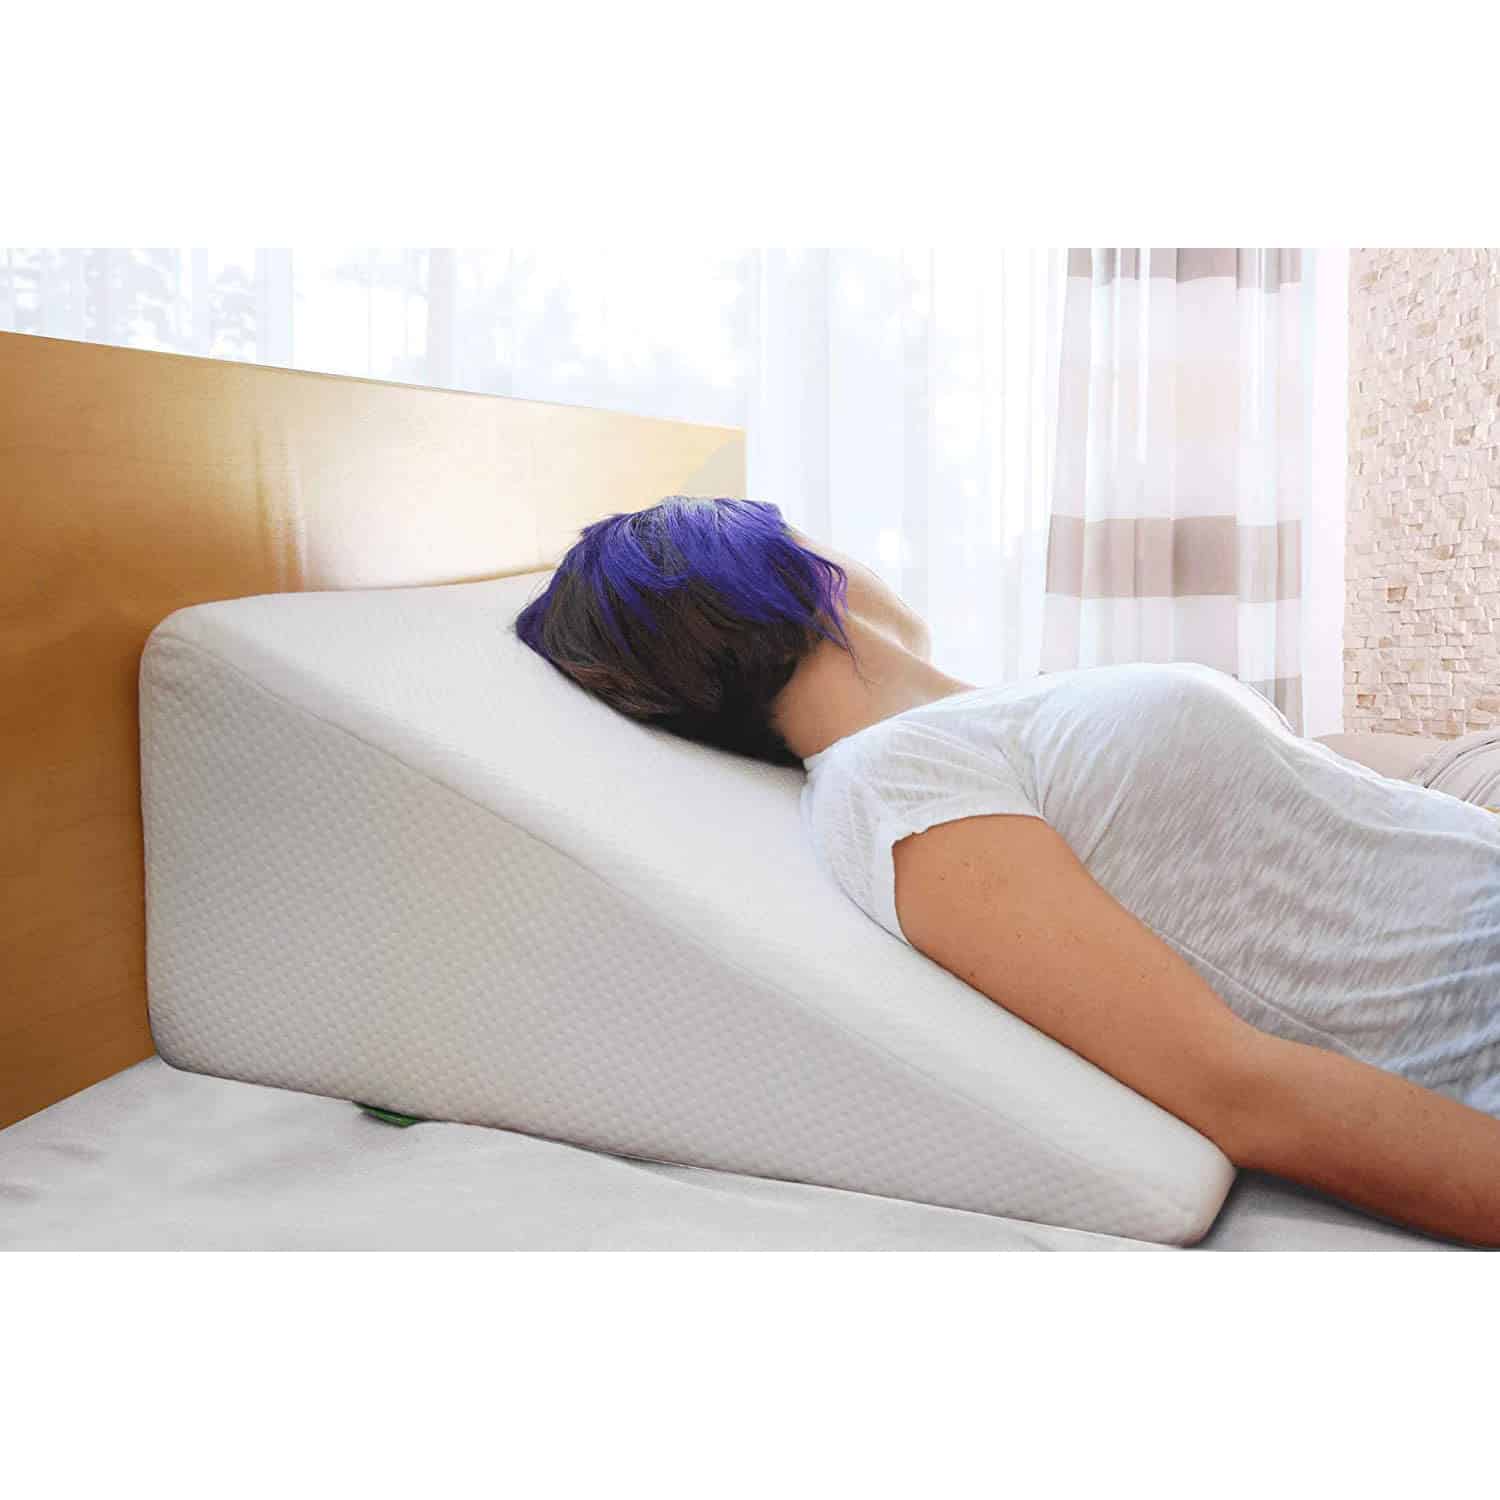 Top 10 Best Bed Wedge Pillows in 2021 Reviews - Go On Products